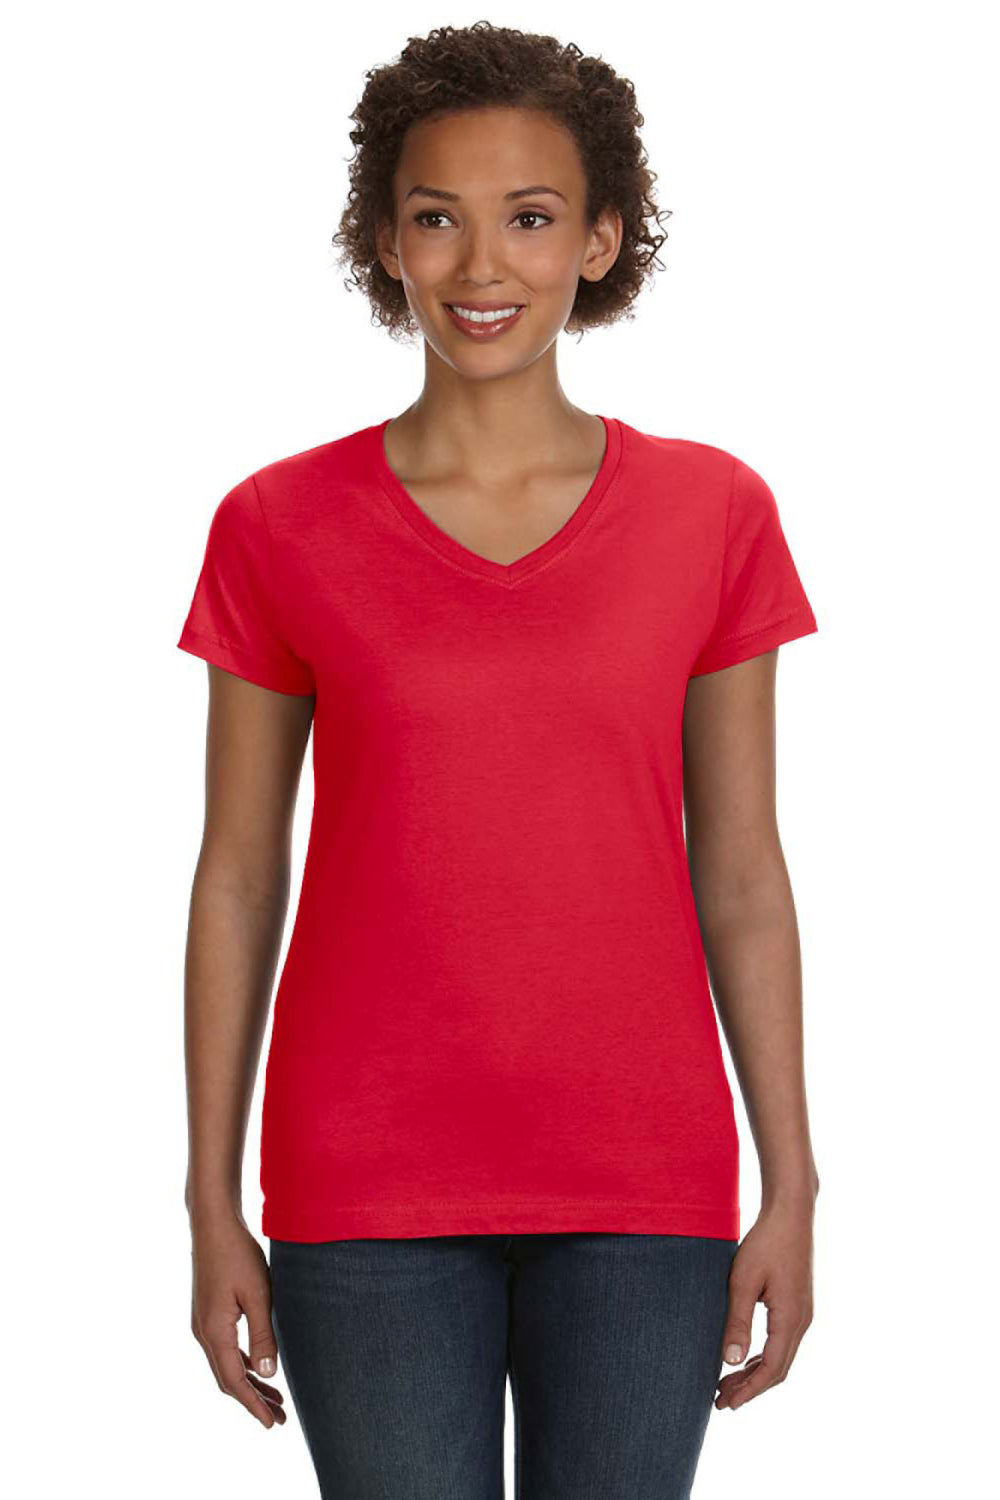 LAT 3507 Womens Fine Jersey Short Sleeve V-Neck T-Shirt Red Front